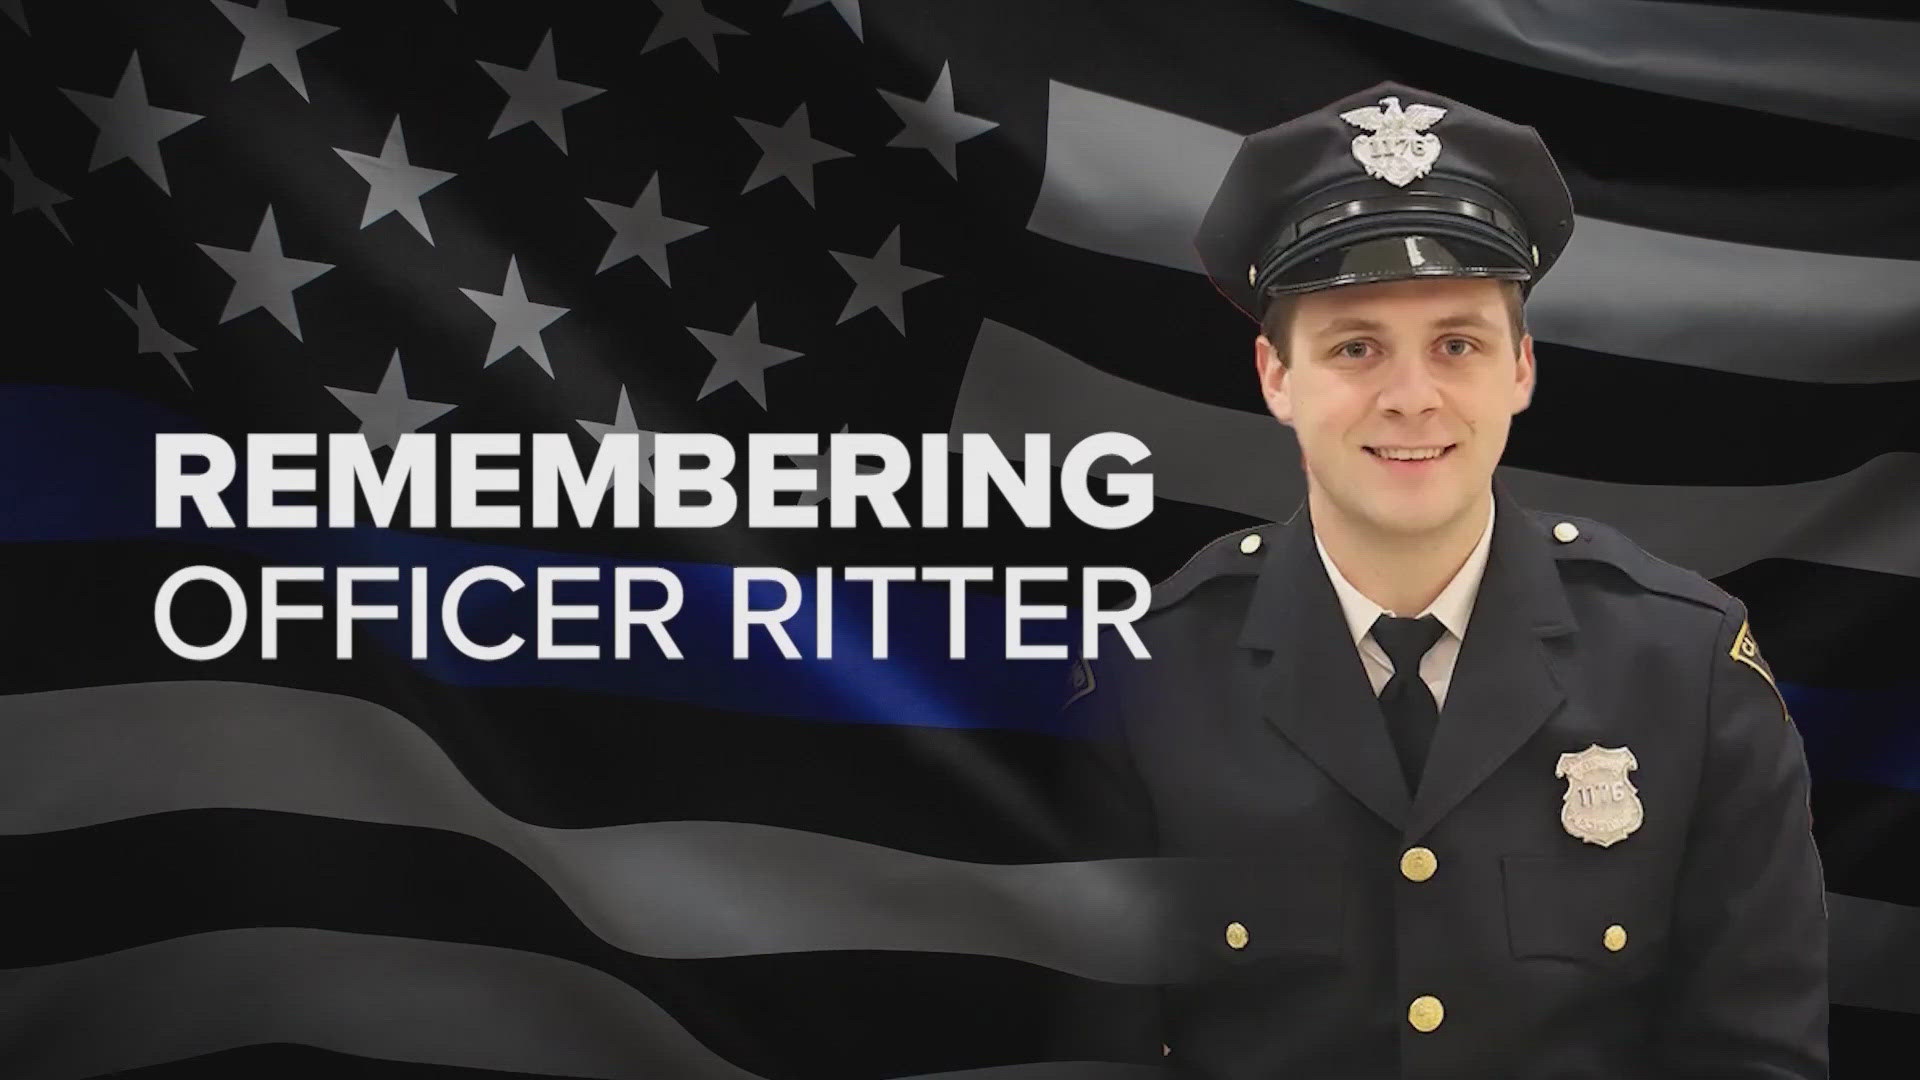 Officer Ritter’s funeral will be held out of state, but no additional details have been provided at this time.